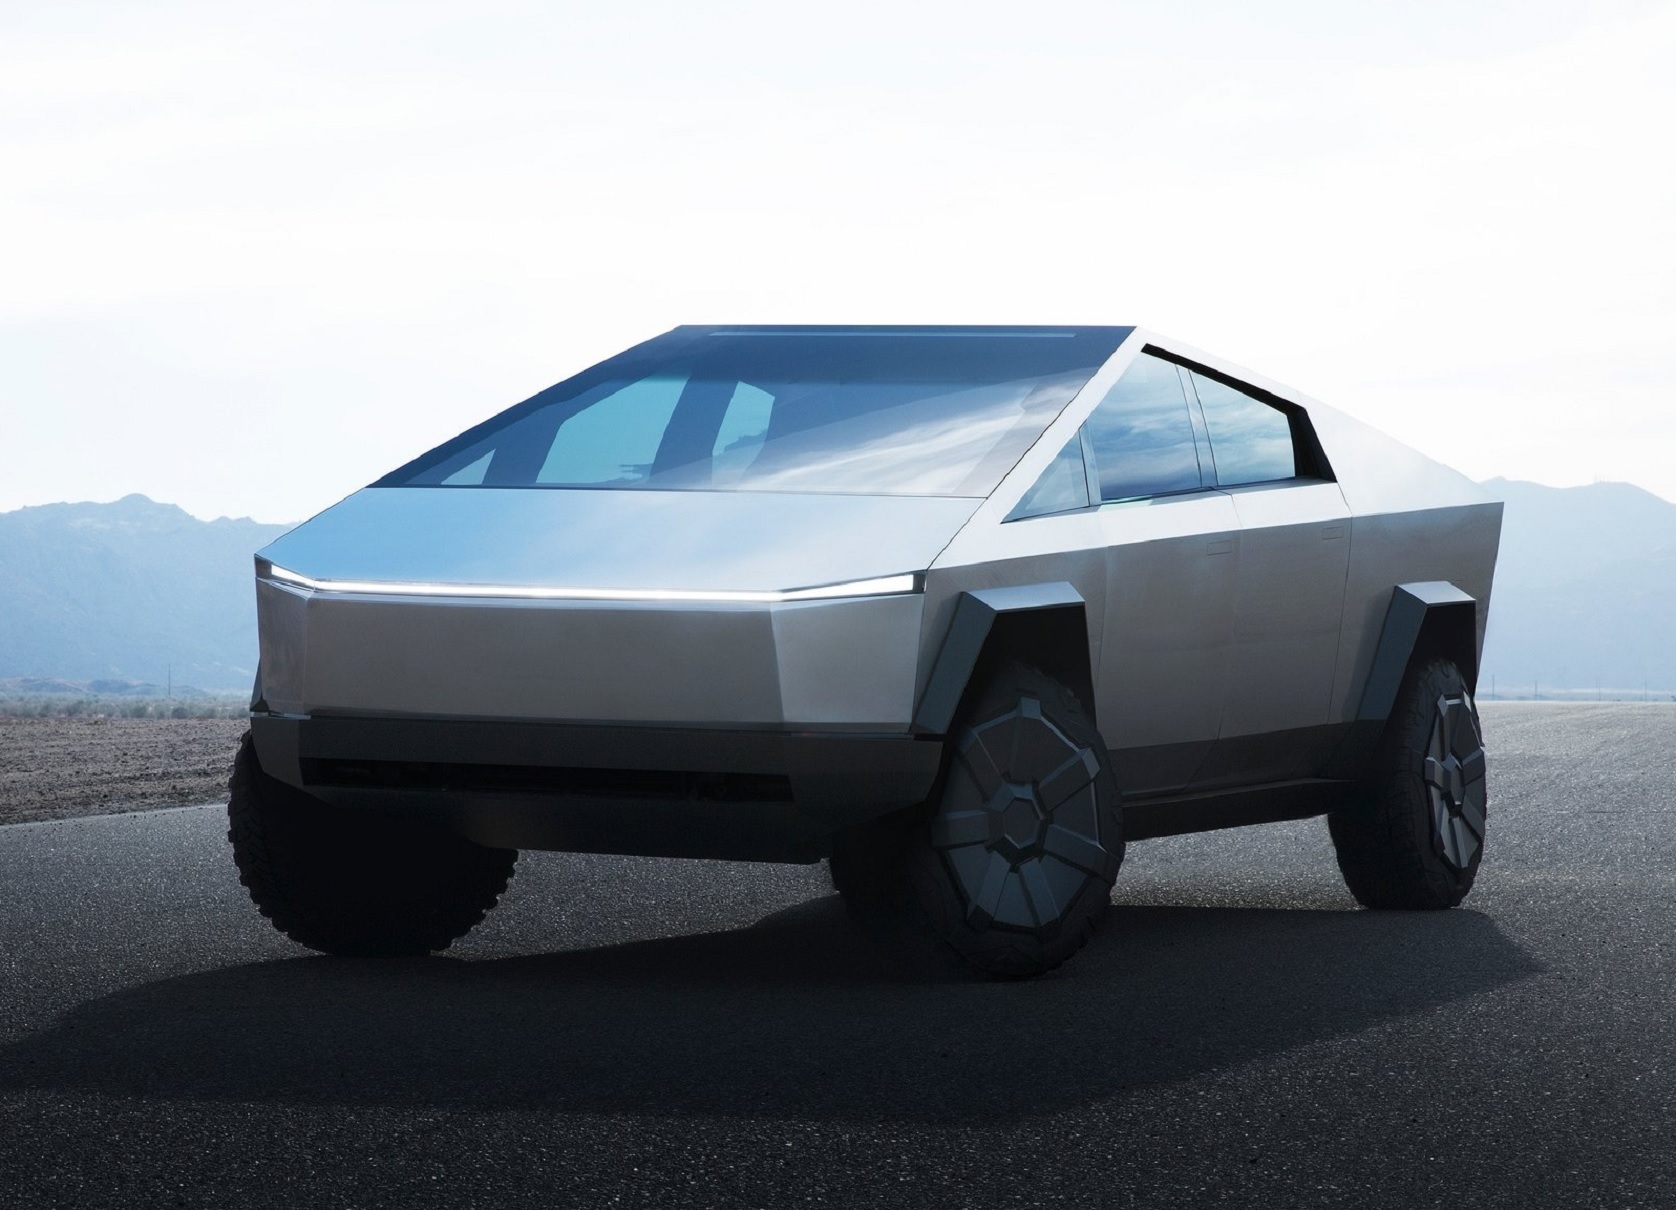 The first stainless-steel Tesla Cybertruck concept on a track